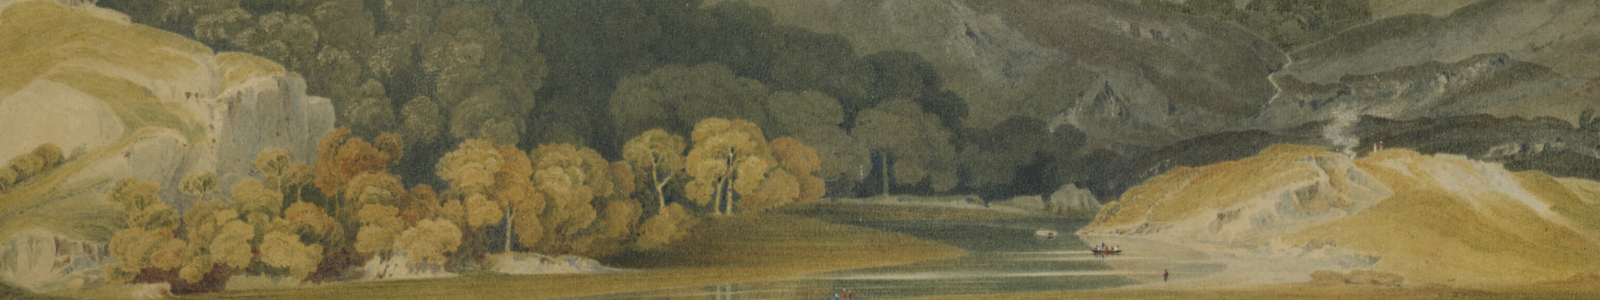 Dramas of Light and Land: The Martyn Gregory Collection of British Art